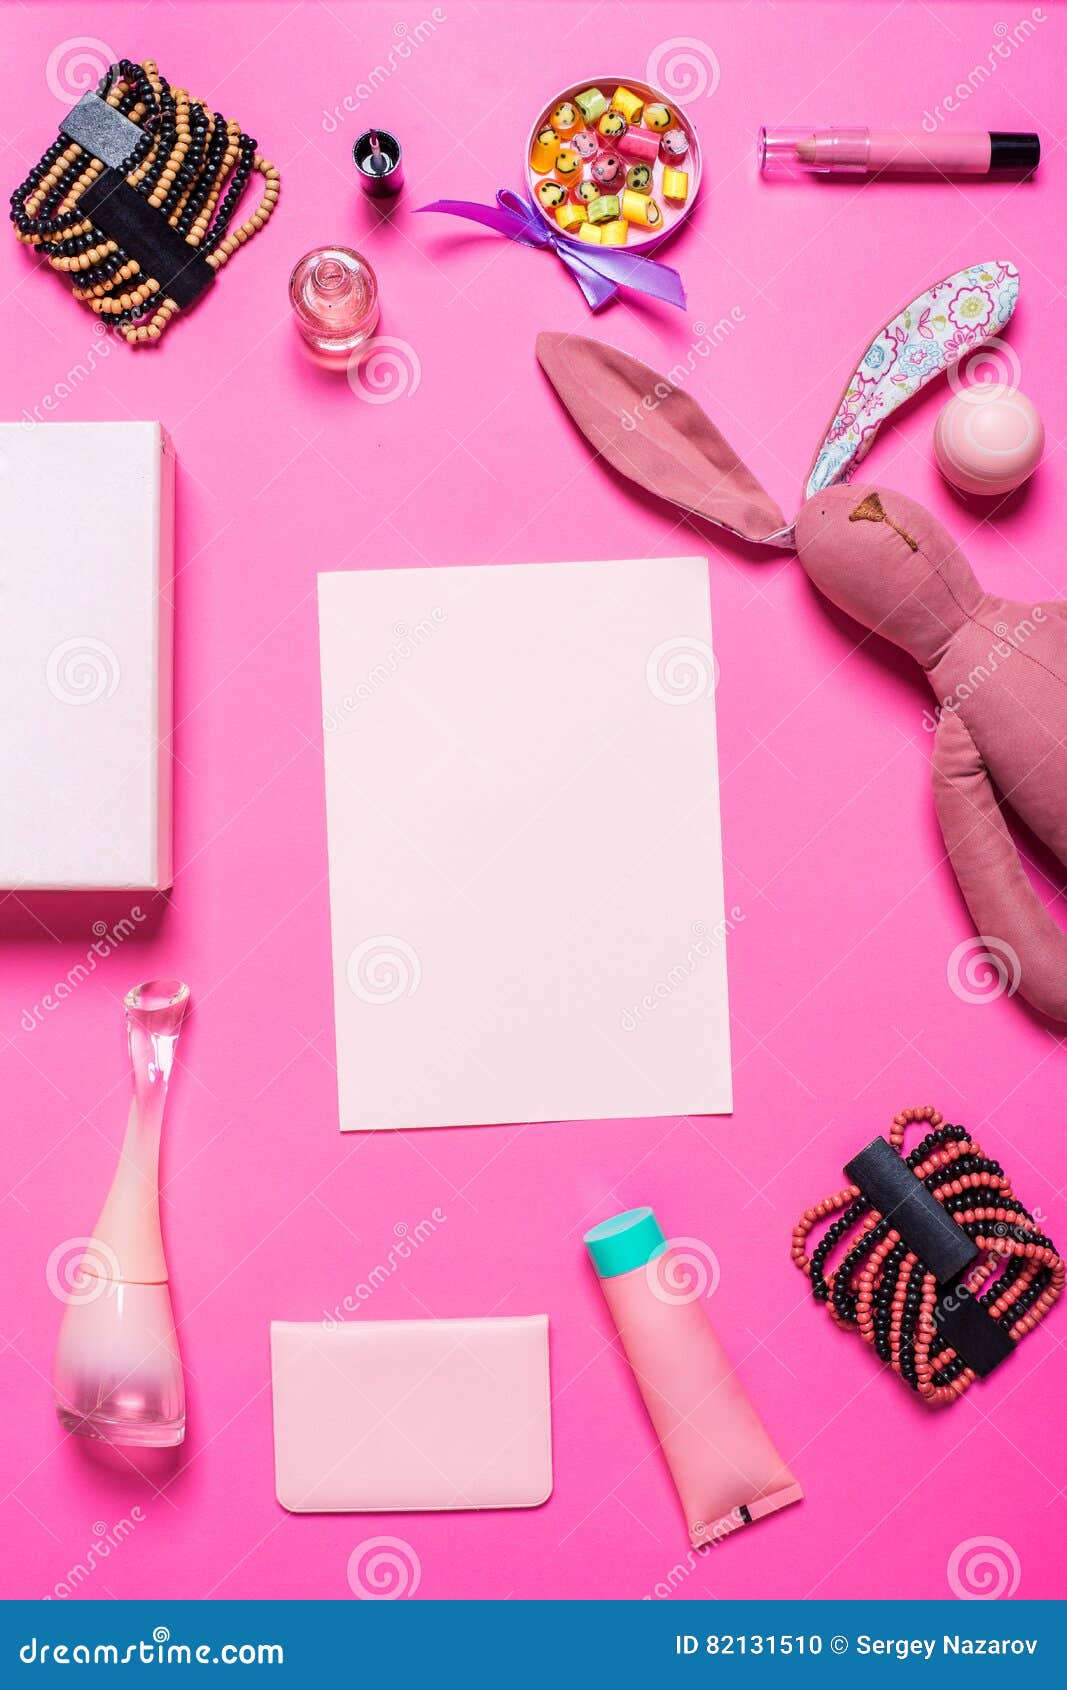 Girl S Accessories on a Pink Background Stock Photo - Image of design ...